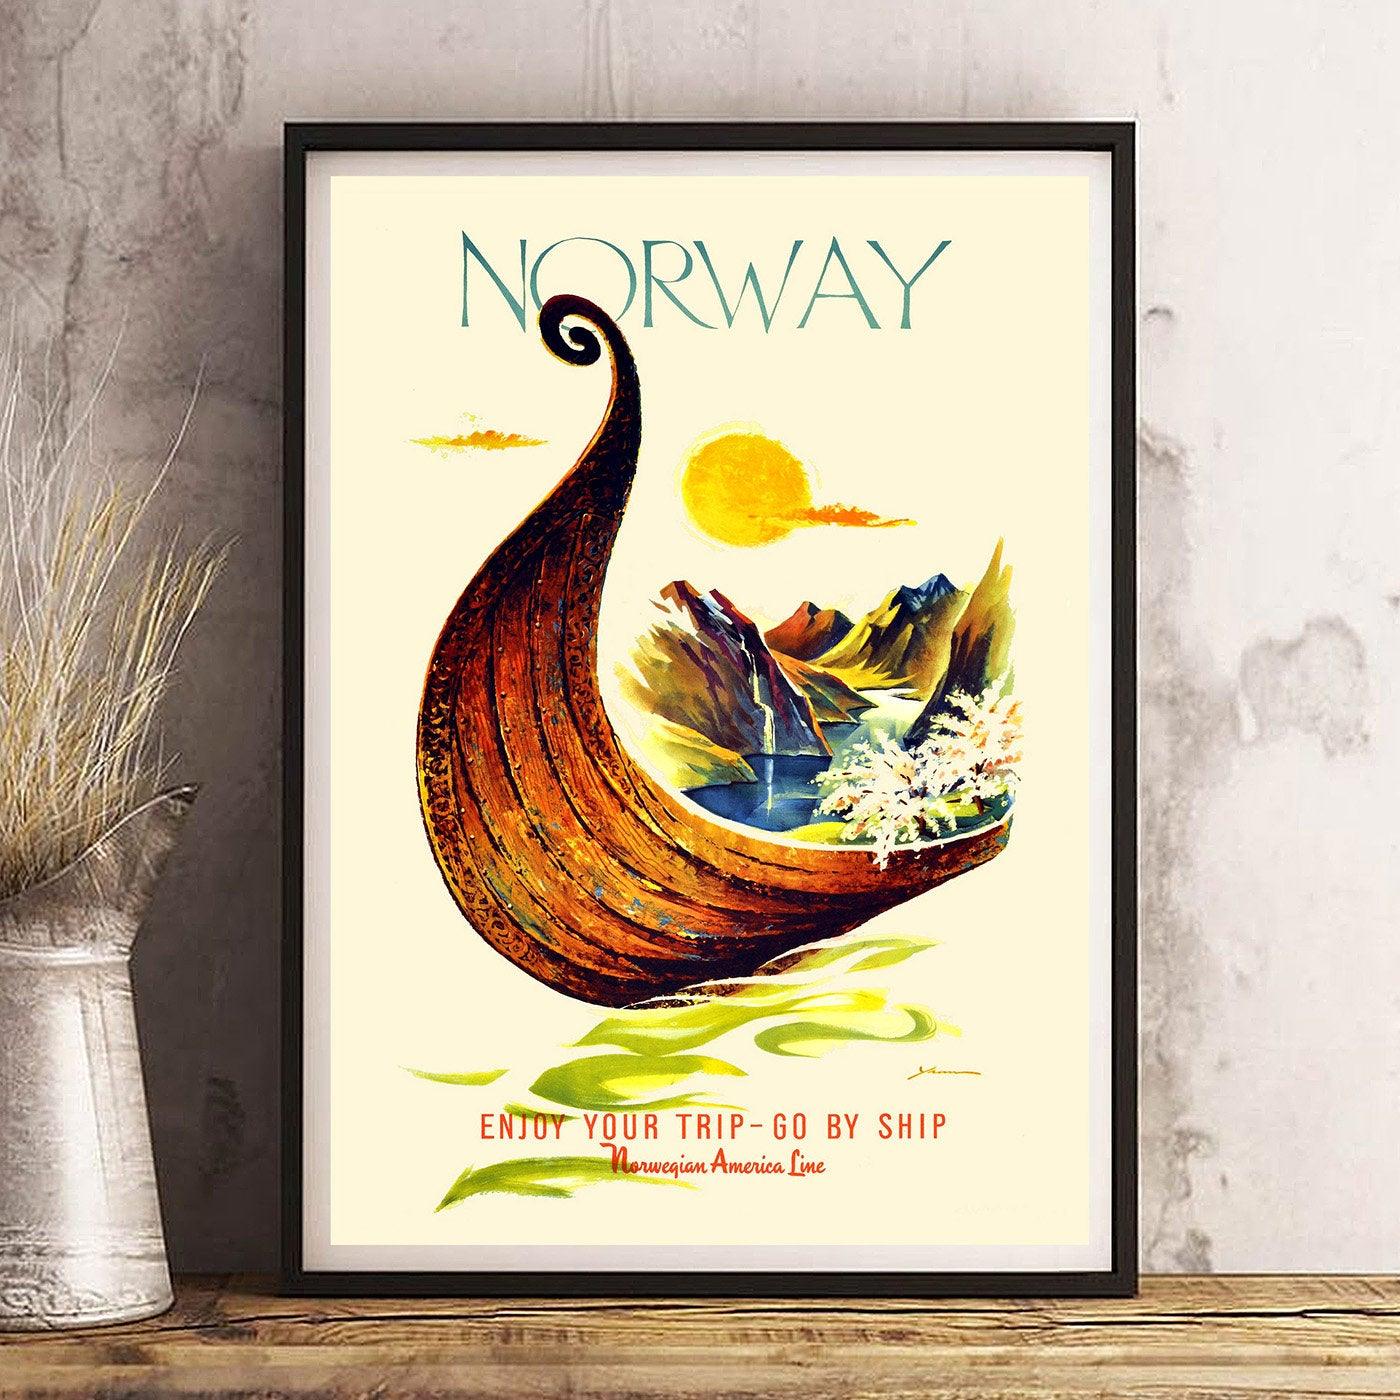 NORWAY Ship - Vintage Travel Poster - Classic Posters